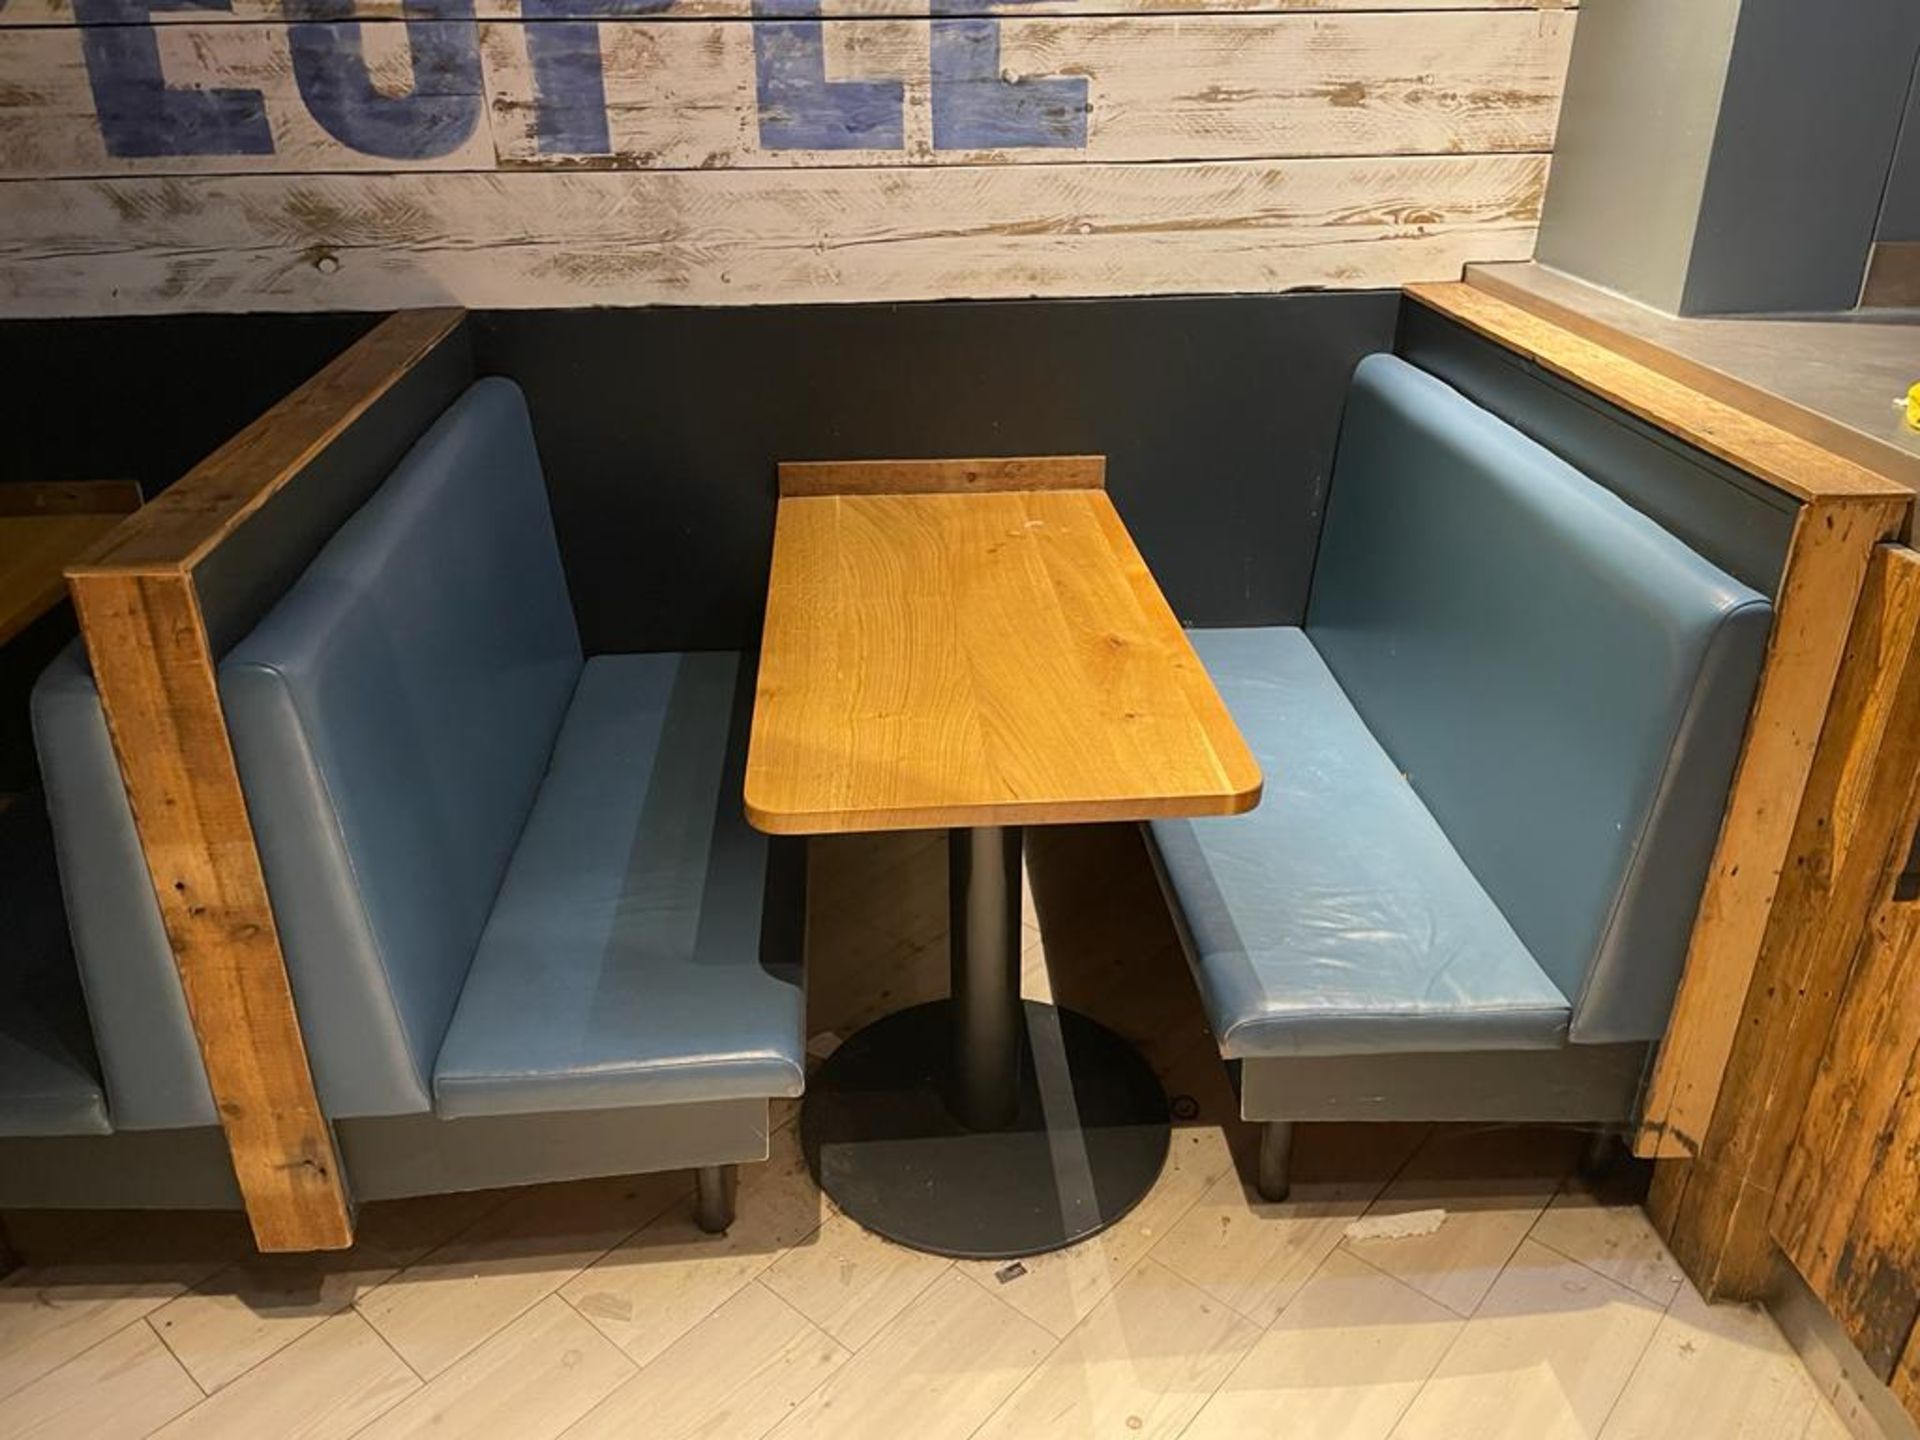 3 x Restaurant Leather Seating Booths With Oak Tables - Includes 6 x Seating Benches Upholstered